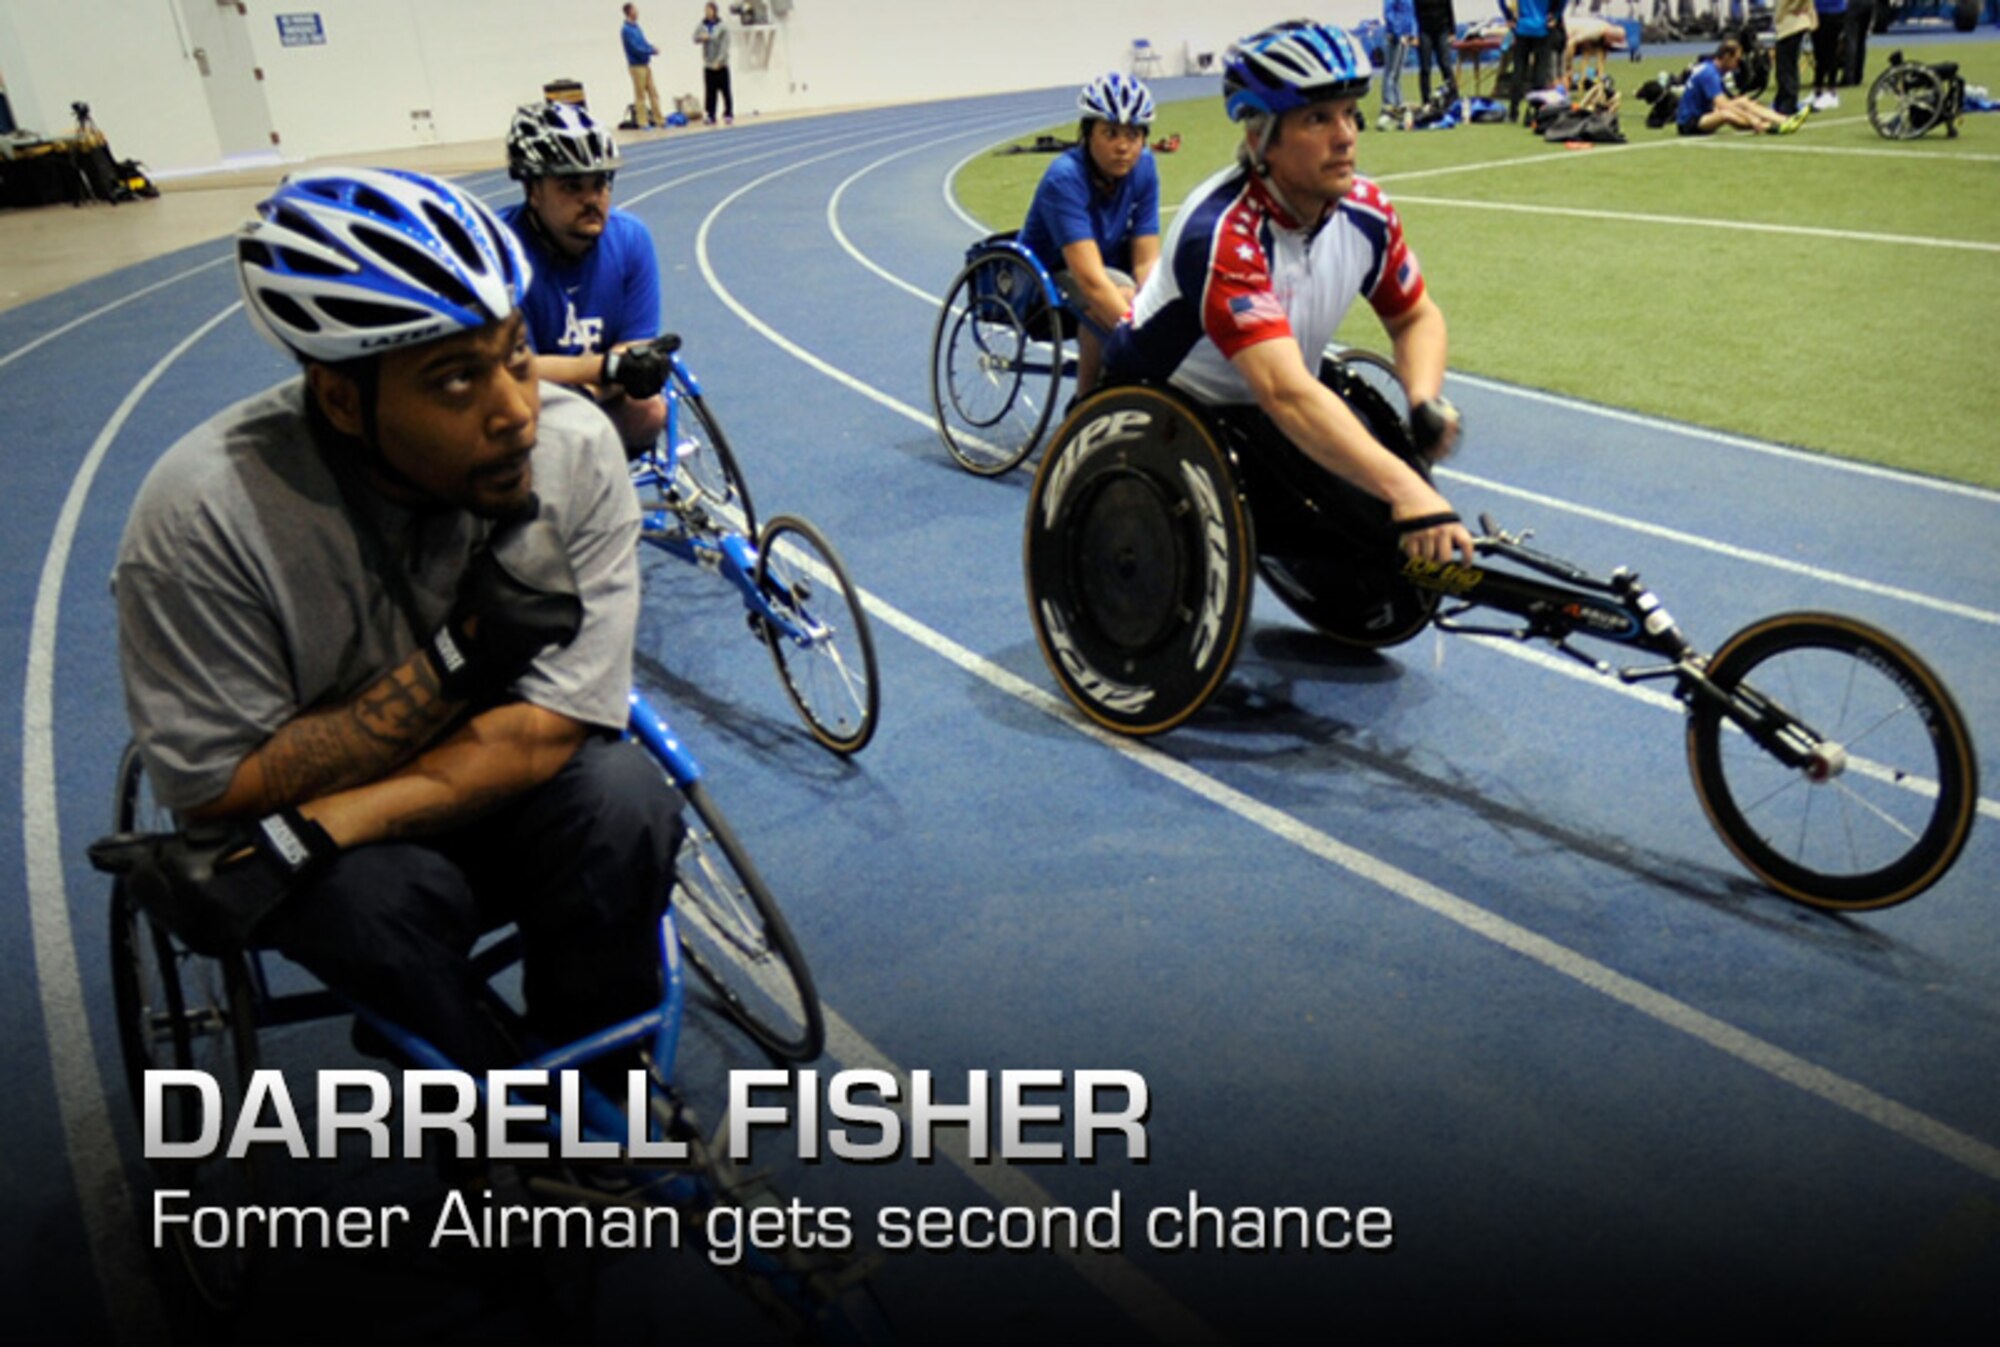 Former Senior Airman Darrell Fisher (left) and his fellow teammates listen to their coach before cycle practice at the U.S. Air Force Academy indoor track during the Air Force's Warrior Games training camp April 17, 2013, in Colorado Springs, Colo. Fisher served as a jet engine mechanic before he separated from the Air Force. (U.S. Air Force photo/Desiree Palacios)